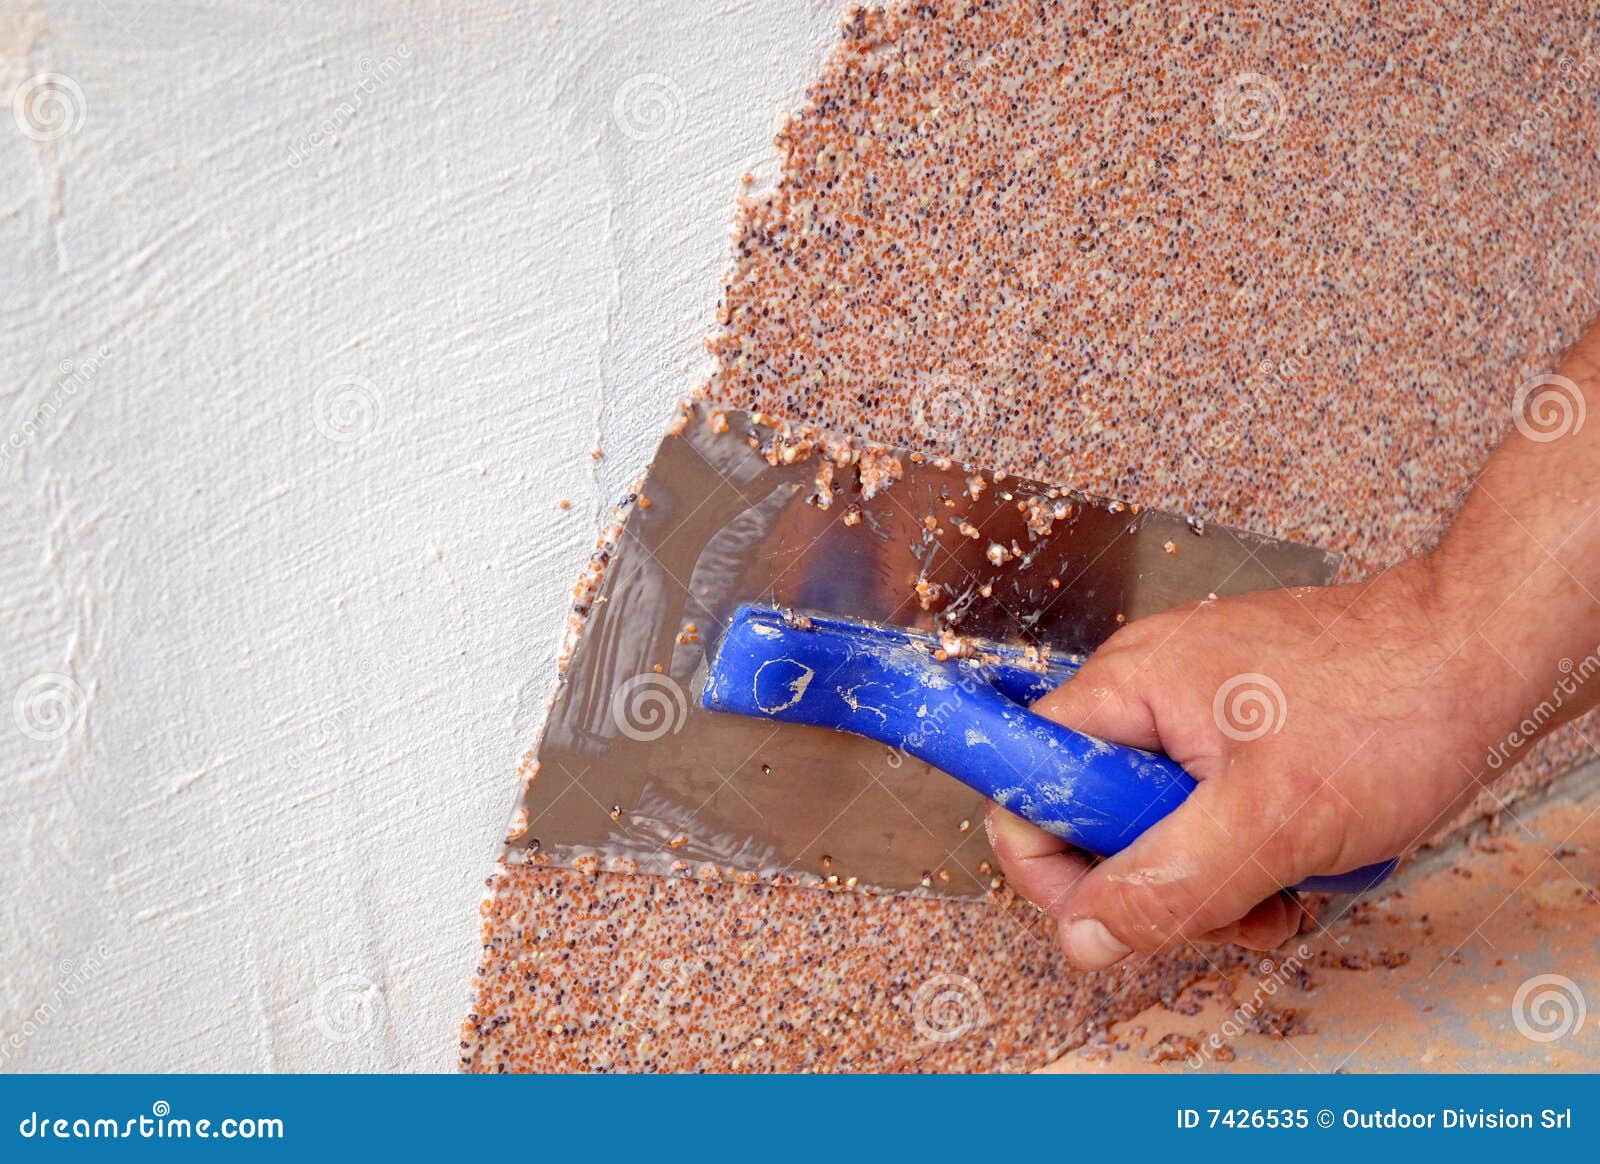 Plastering tool stock image. Image of background, wall - 7426535